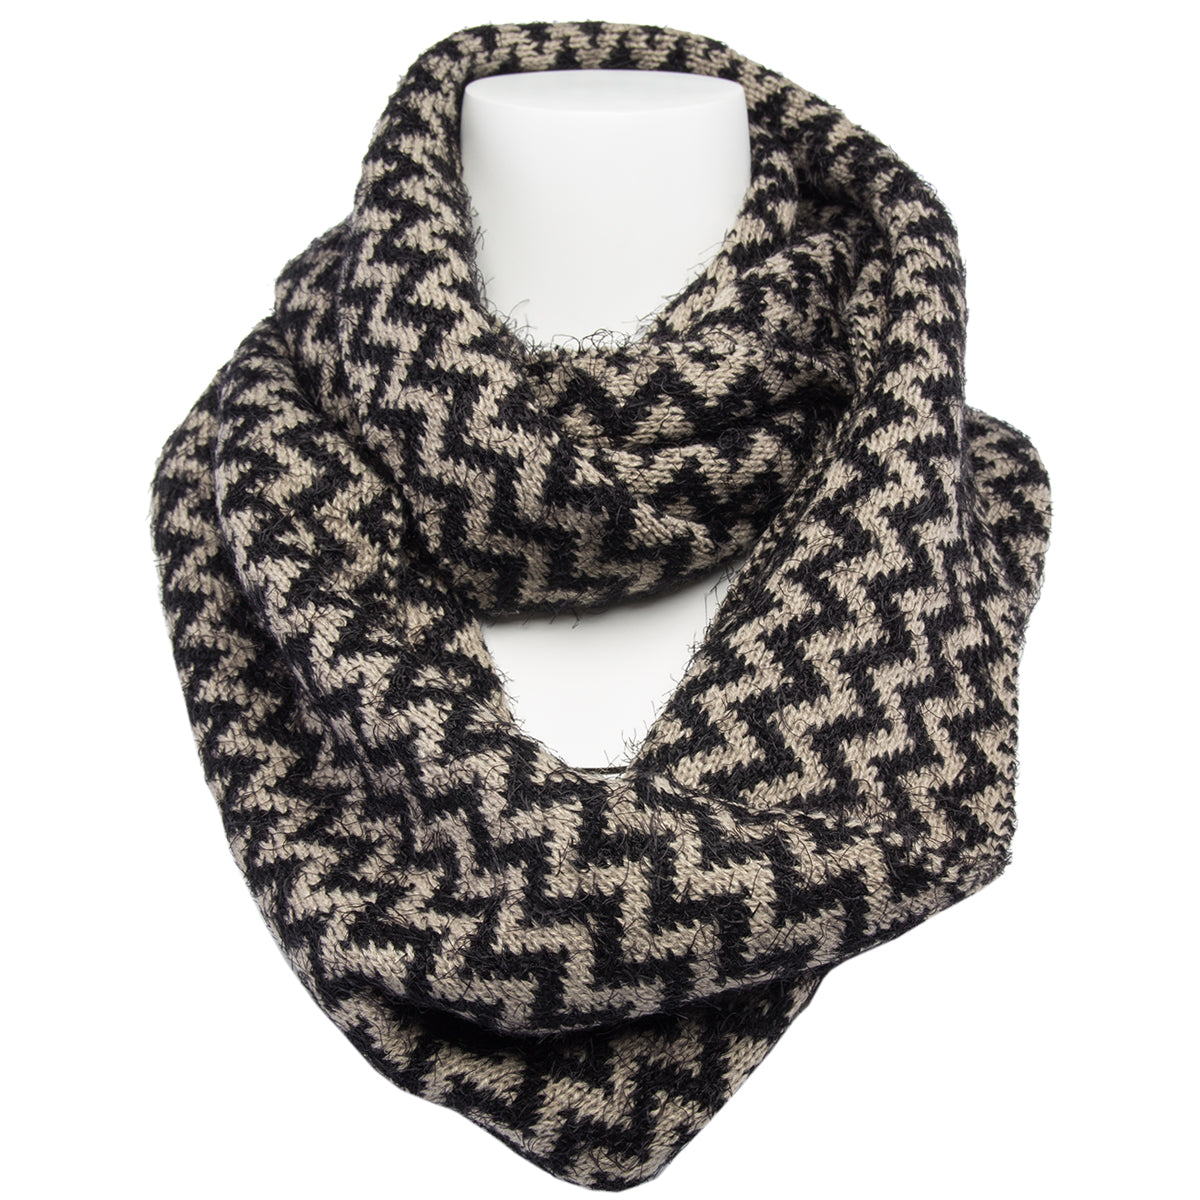 Women’s Soft Chevron Infinity Scarf By Tickled Pink – Versatile